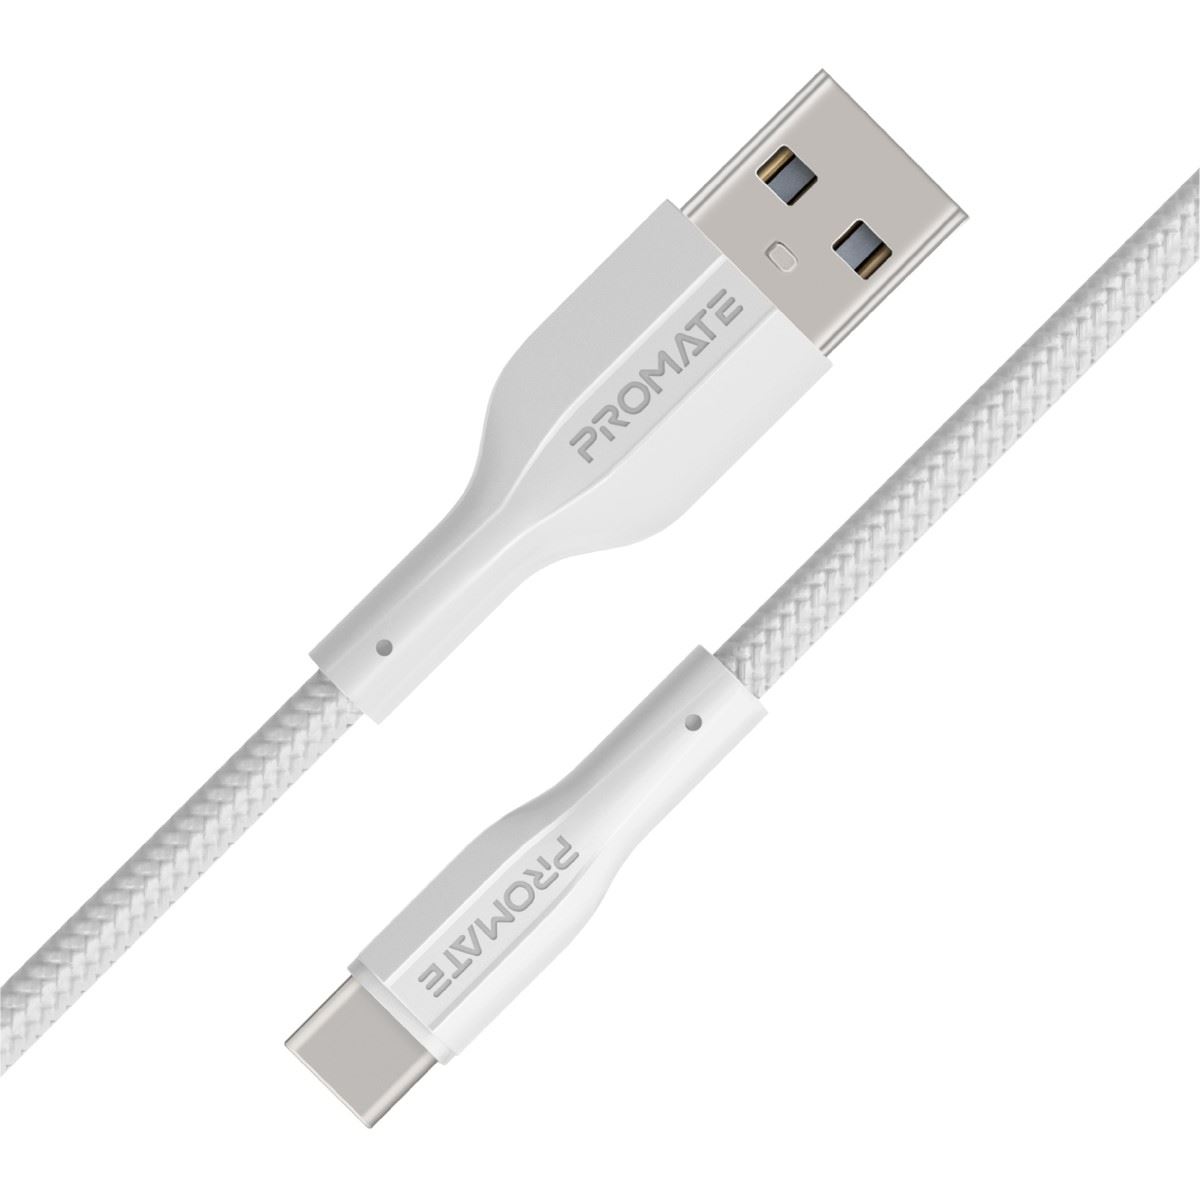 PROMATE 1M USB-A to USB-C Super Flexible Cable. Supports 2A Charging & 480Mbps Data Transfer. White Colour.